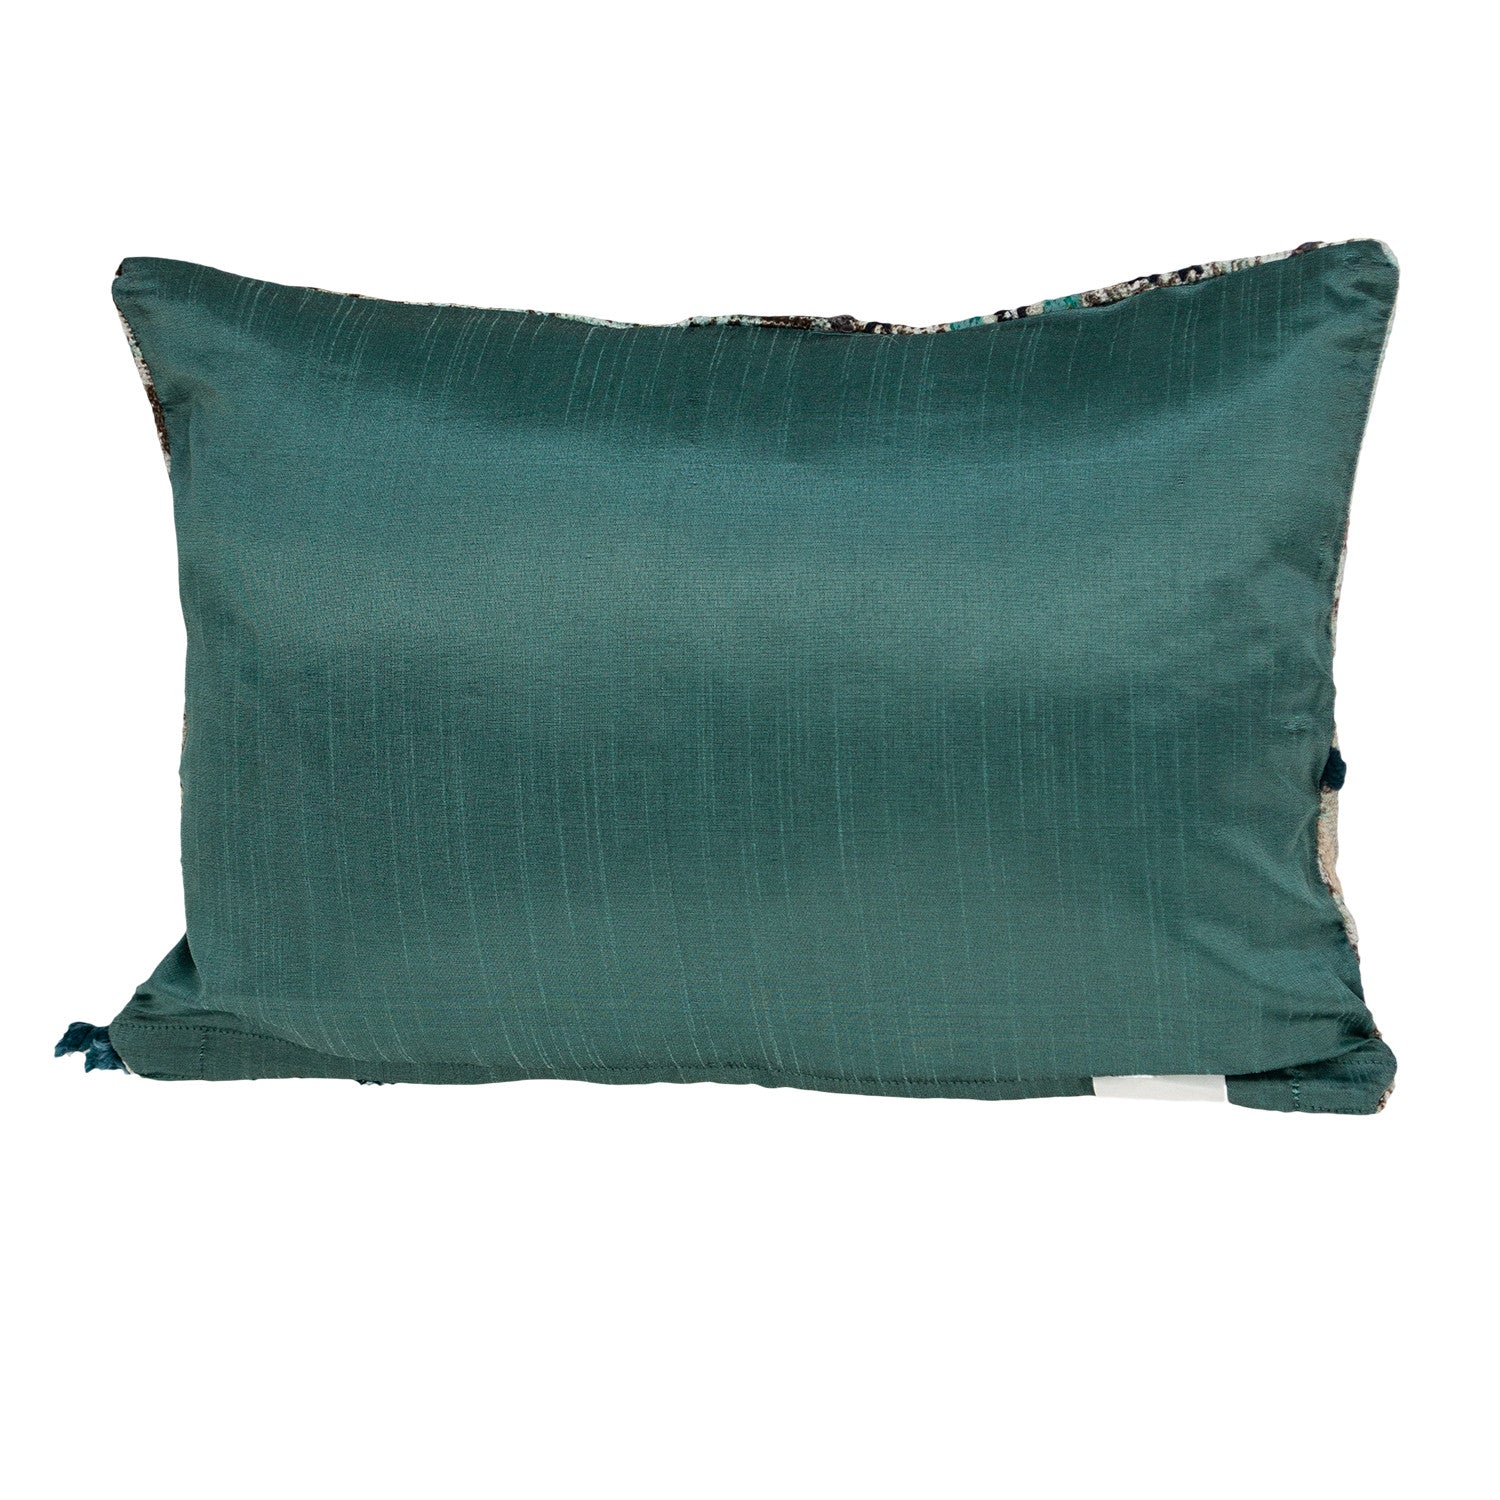 14" X 20" Beige And Green Zippered 100% Cotton Throw Pillow With Fringe